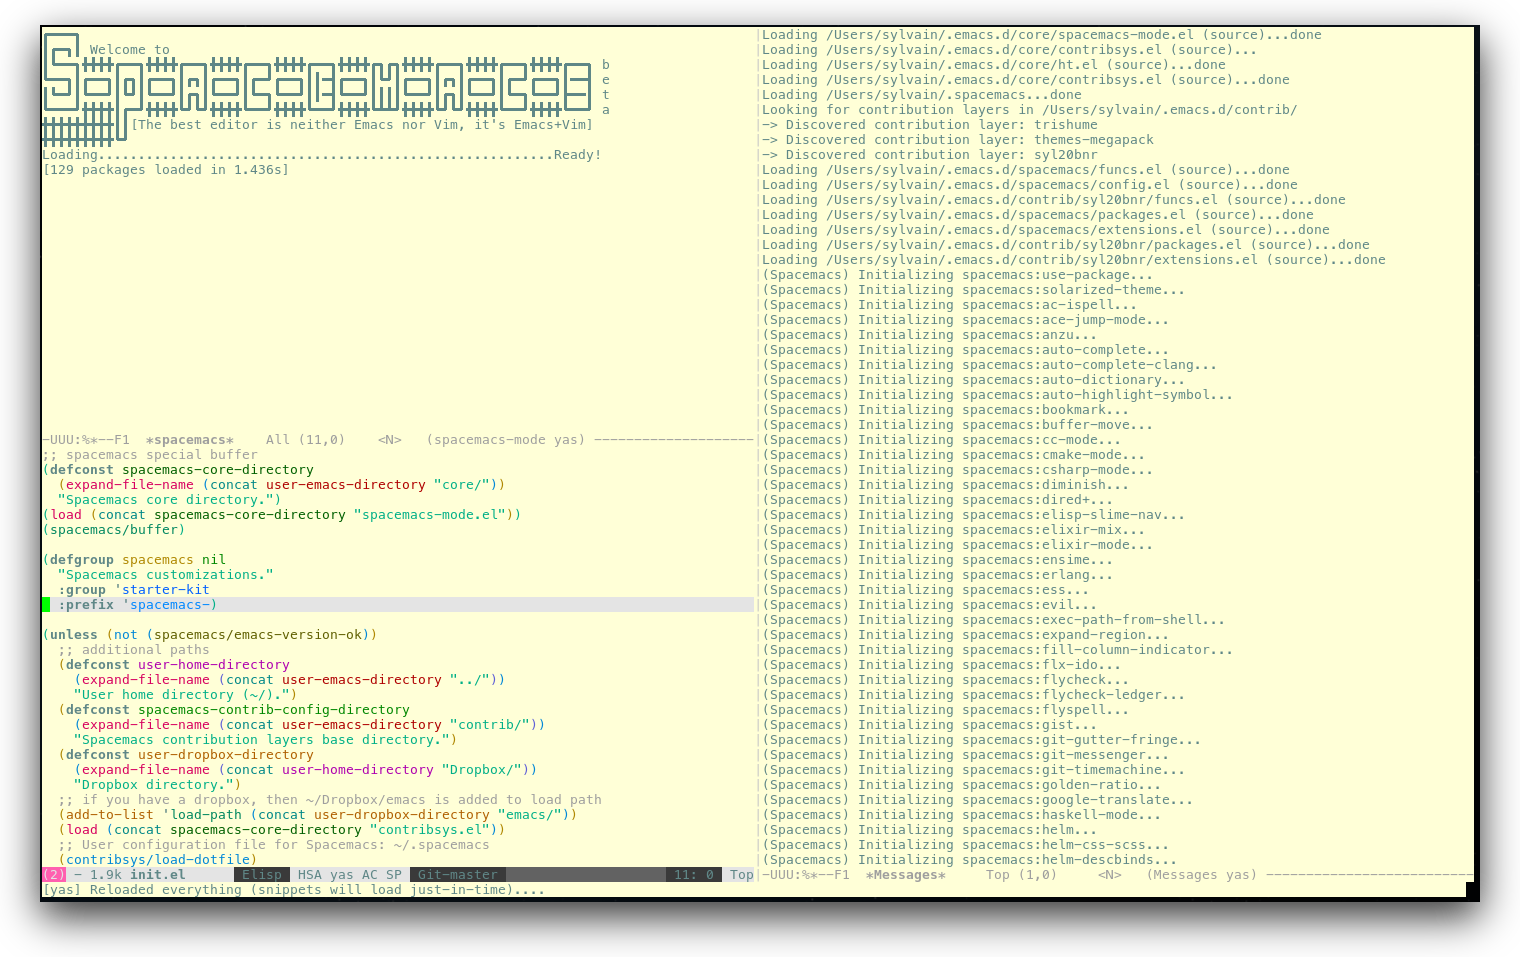 /TakeV/spacemacs/media/commit/98e43b17ad0210984172b80342d7647367424af1/doc/img/spacemacs-urxvt.png